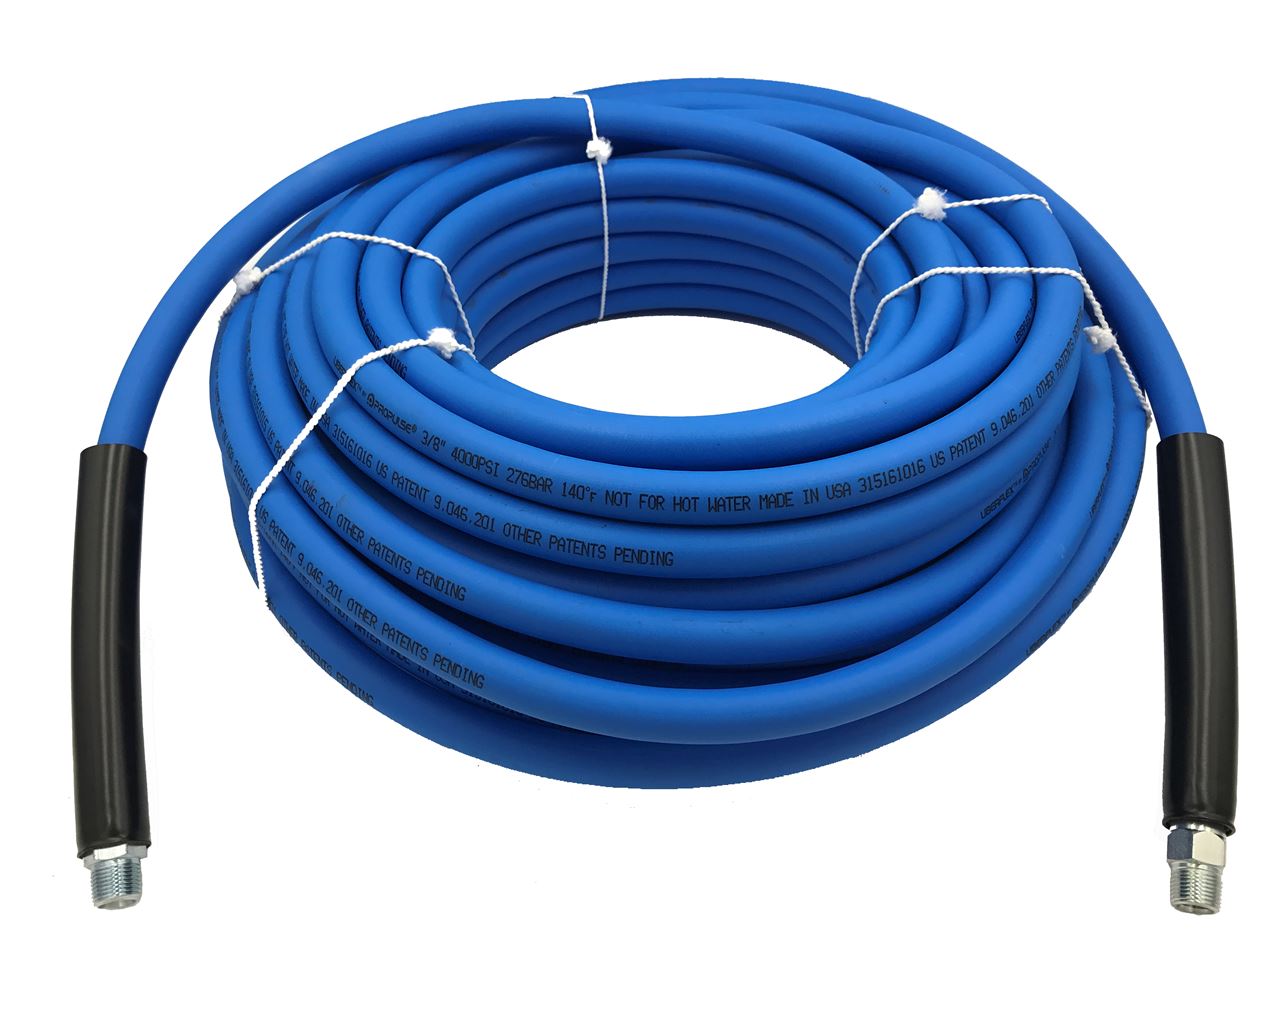 Details about   4000PSI 3/8" x 50FT Blue Non-Marking Pressure Washer Hose w/ QC Fittings 